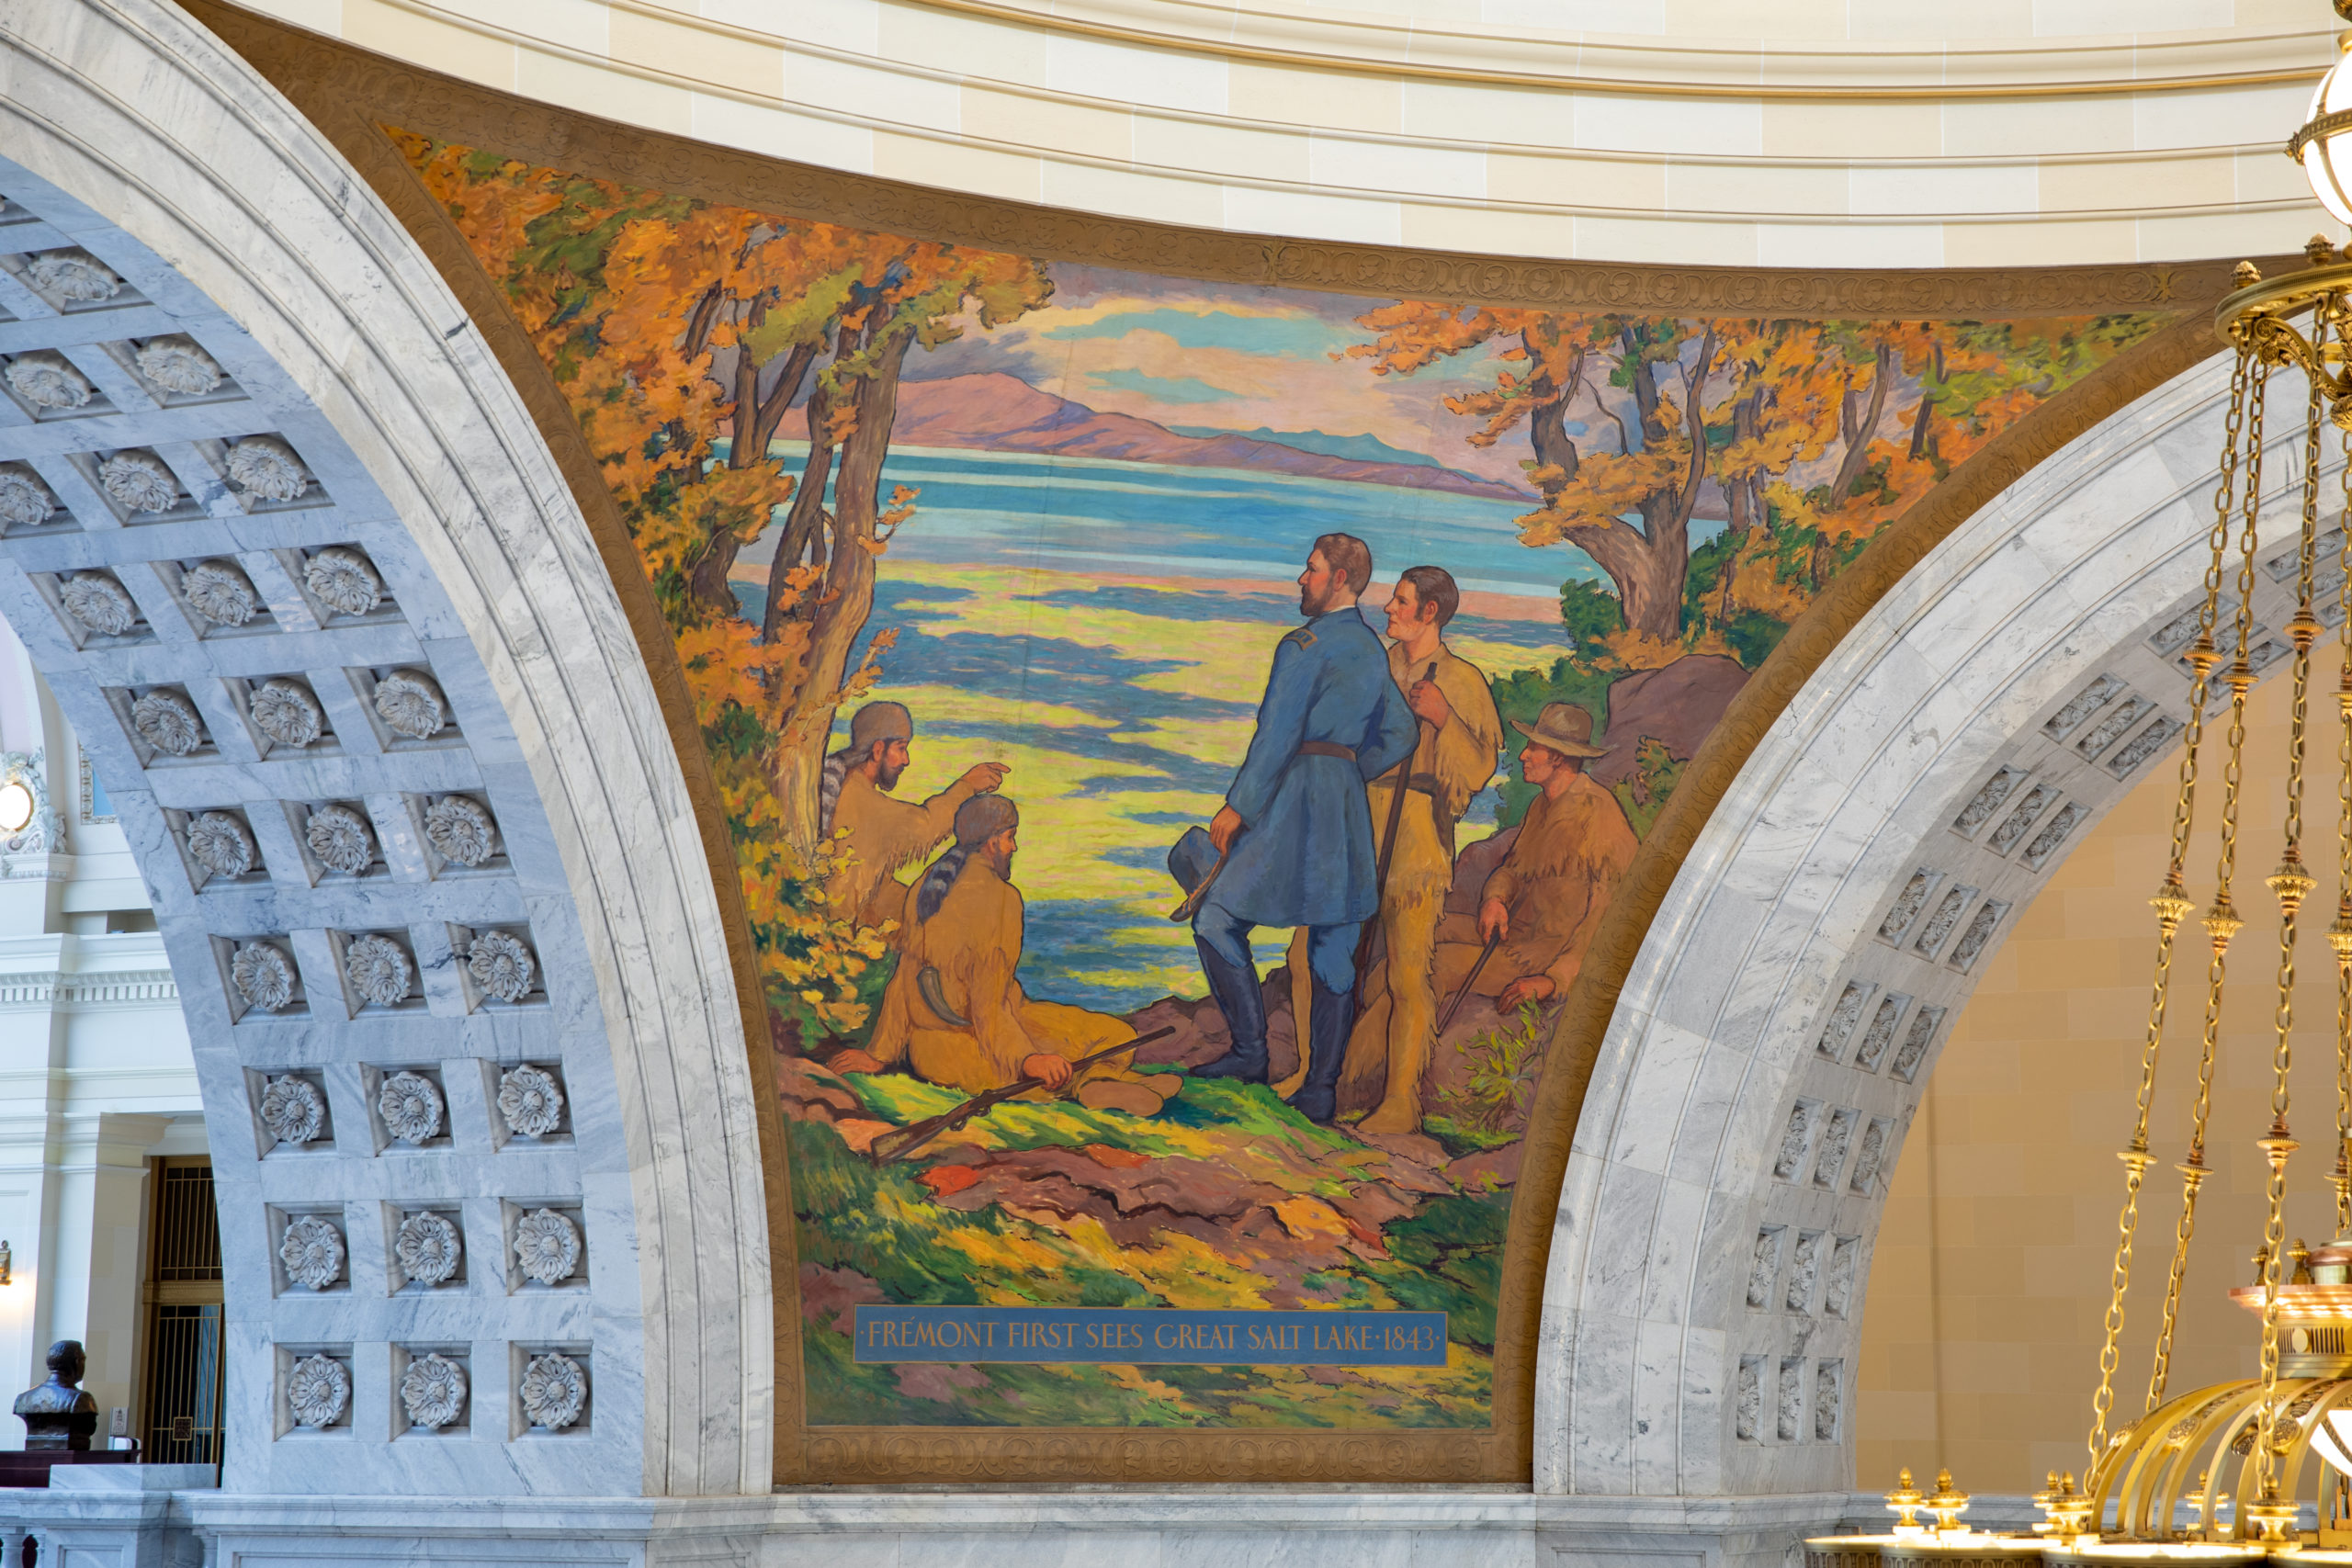 Pendentive, painting of Fremont and other explorers at the Great Salt Lake in the Rotunda of the Utah State Capitol.